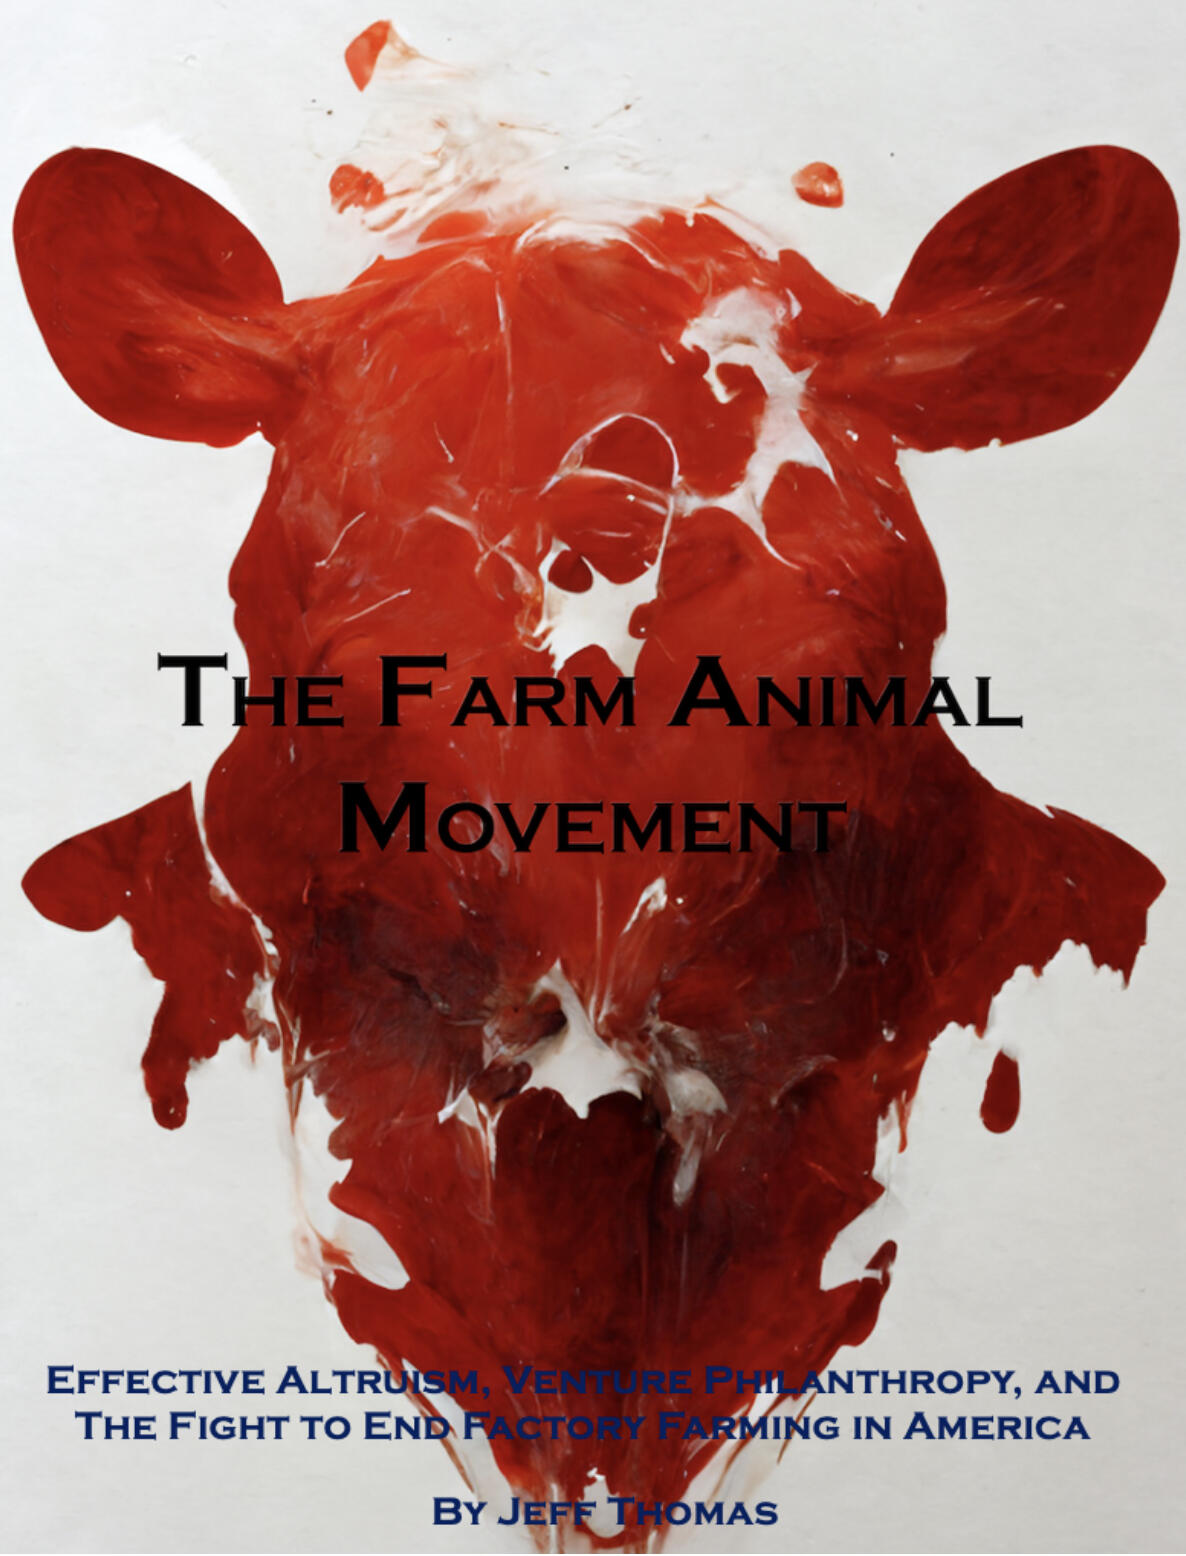 A book cover with That says \"The Farm Animal Movement Effective Altruism, Venture Philosophy, and the Fight to End Factory Farming in America by Jeff Thomas\" 